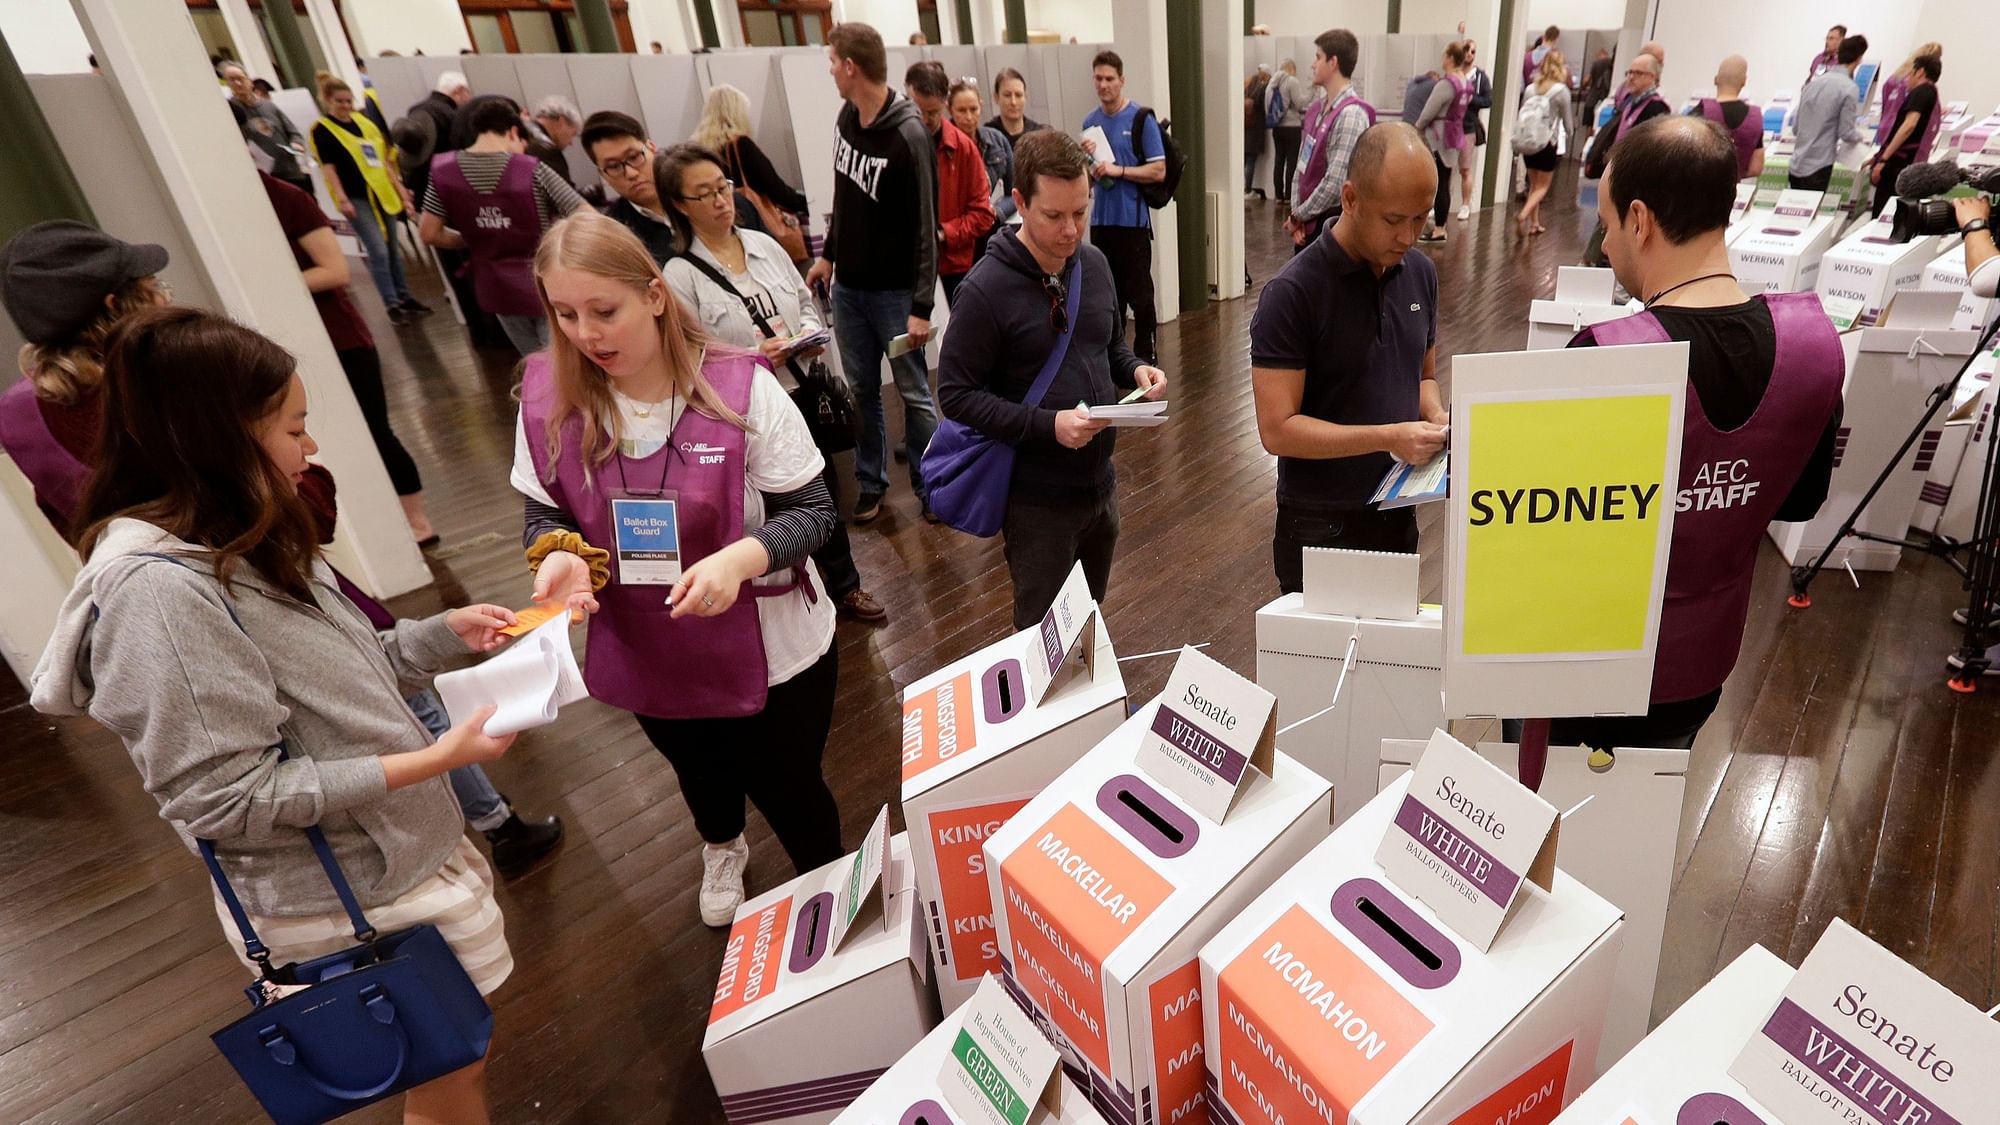 Voters cast their ballots at the Town Hall in Sydney, Australia